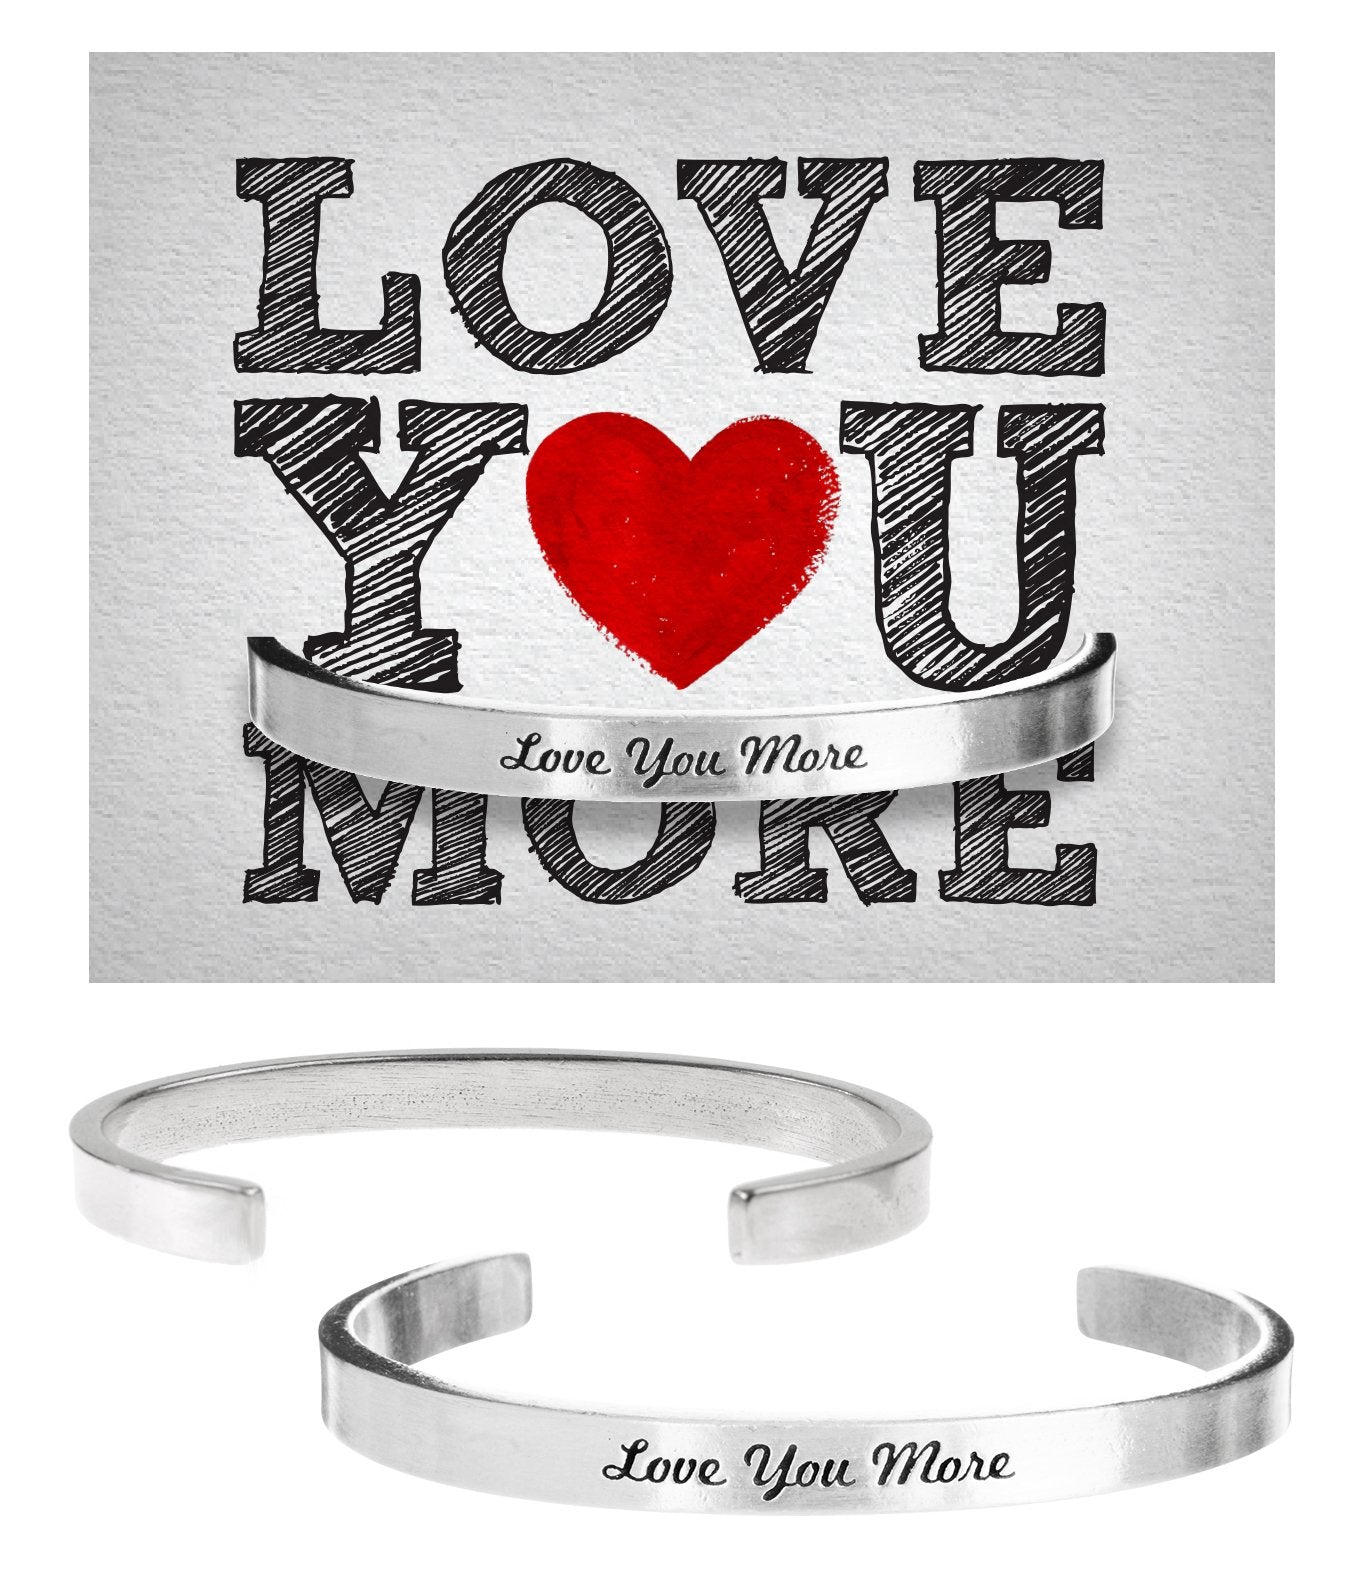 &quot;Love you more&quot; Quotable Cuff on Love You More Backer Card